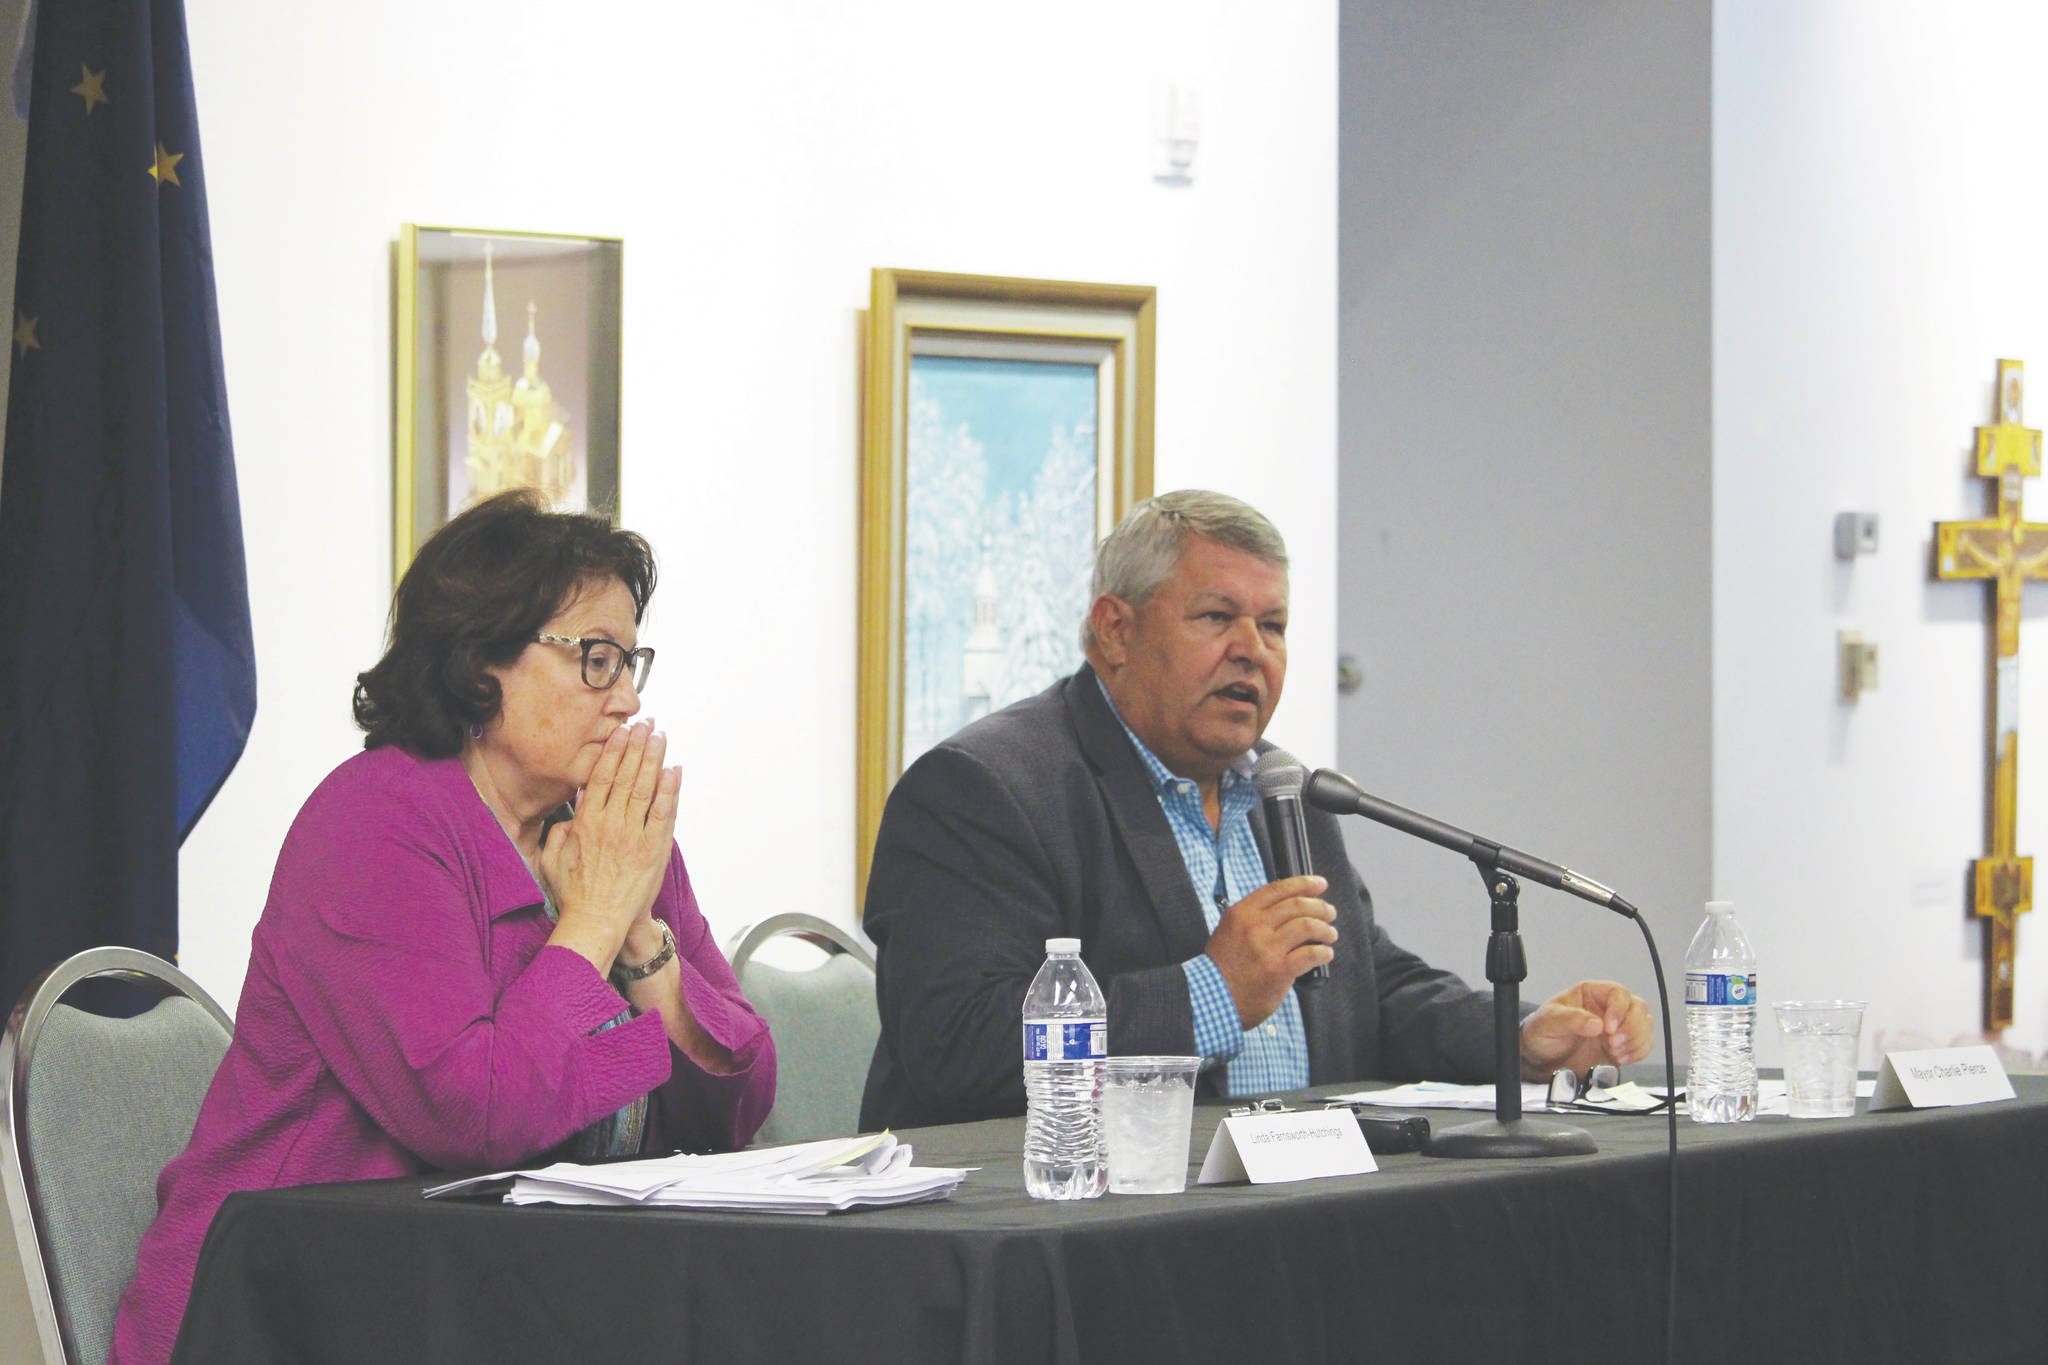 Photo by Brian Mazurek/Peninsula Clarion                                 Linda Farnsworth Hutchings, left, and Kenai Peninsula Borough Mayor Charlie Pierce, right, participate in a mayoral candidate forum hosted by the Kenai Chamber of Commerce at the Kenai Visitor and Cultural Center on Sept. 9